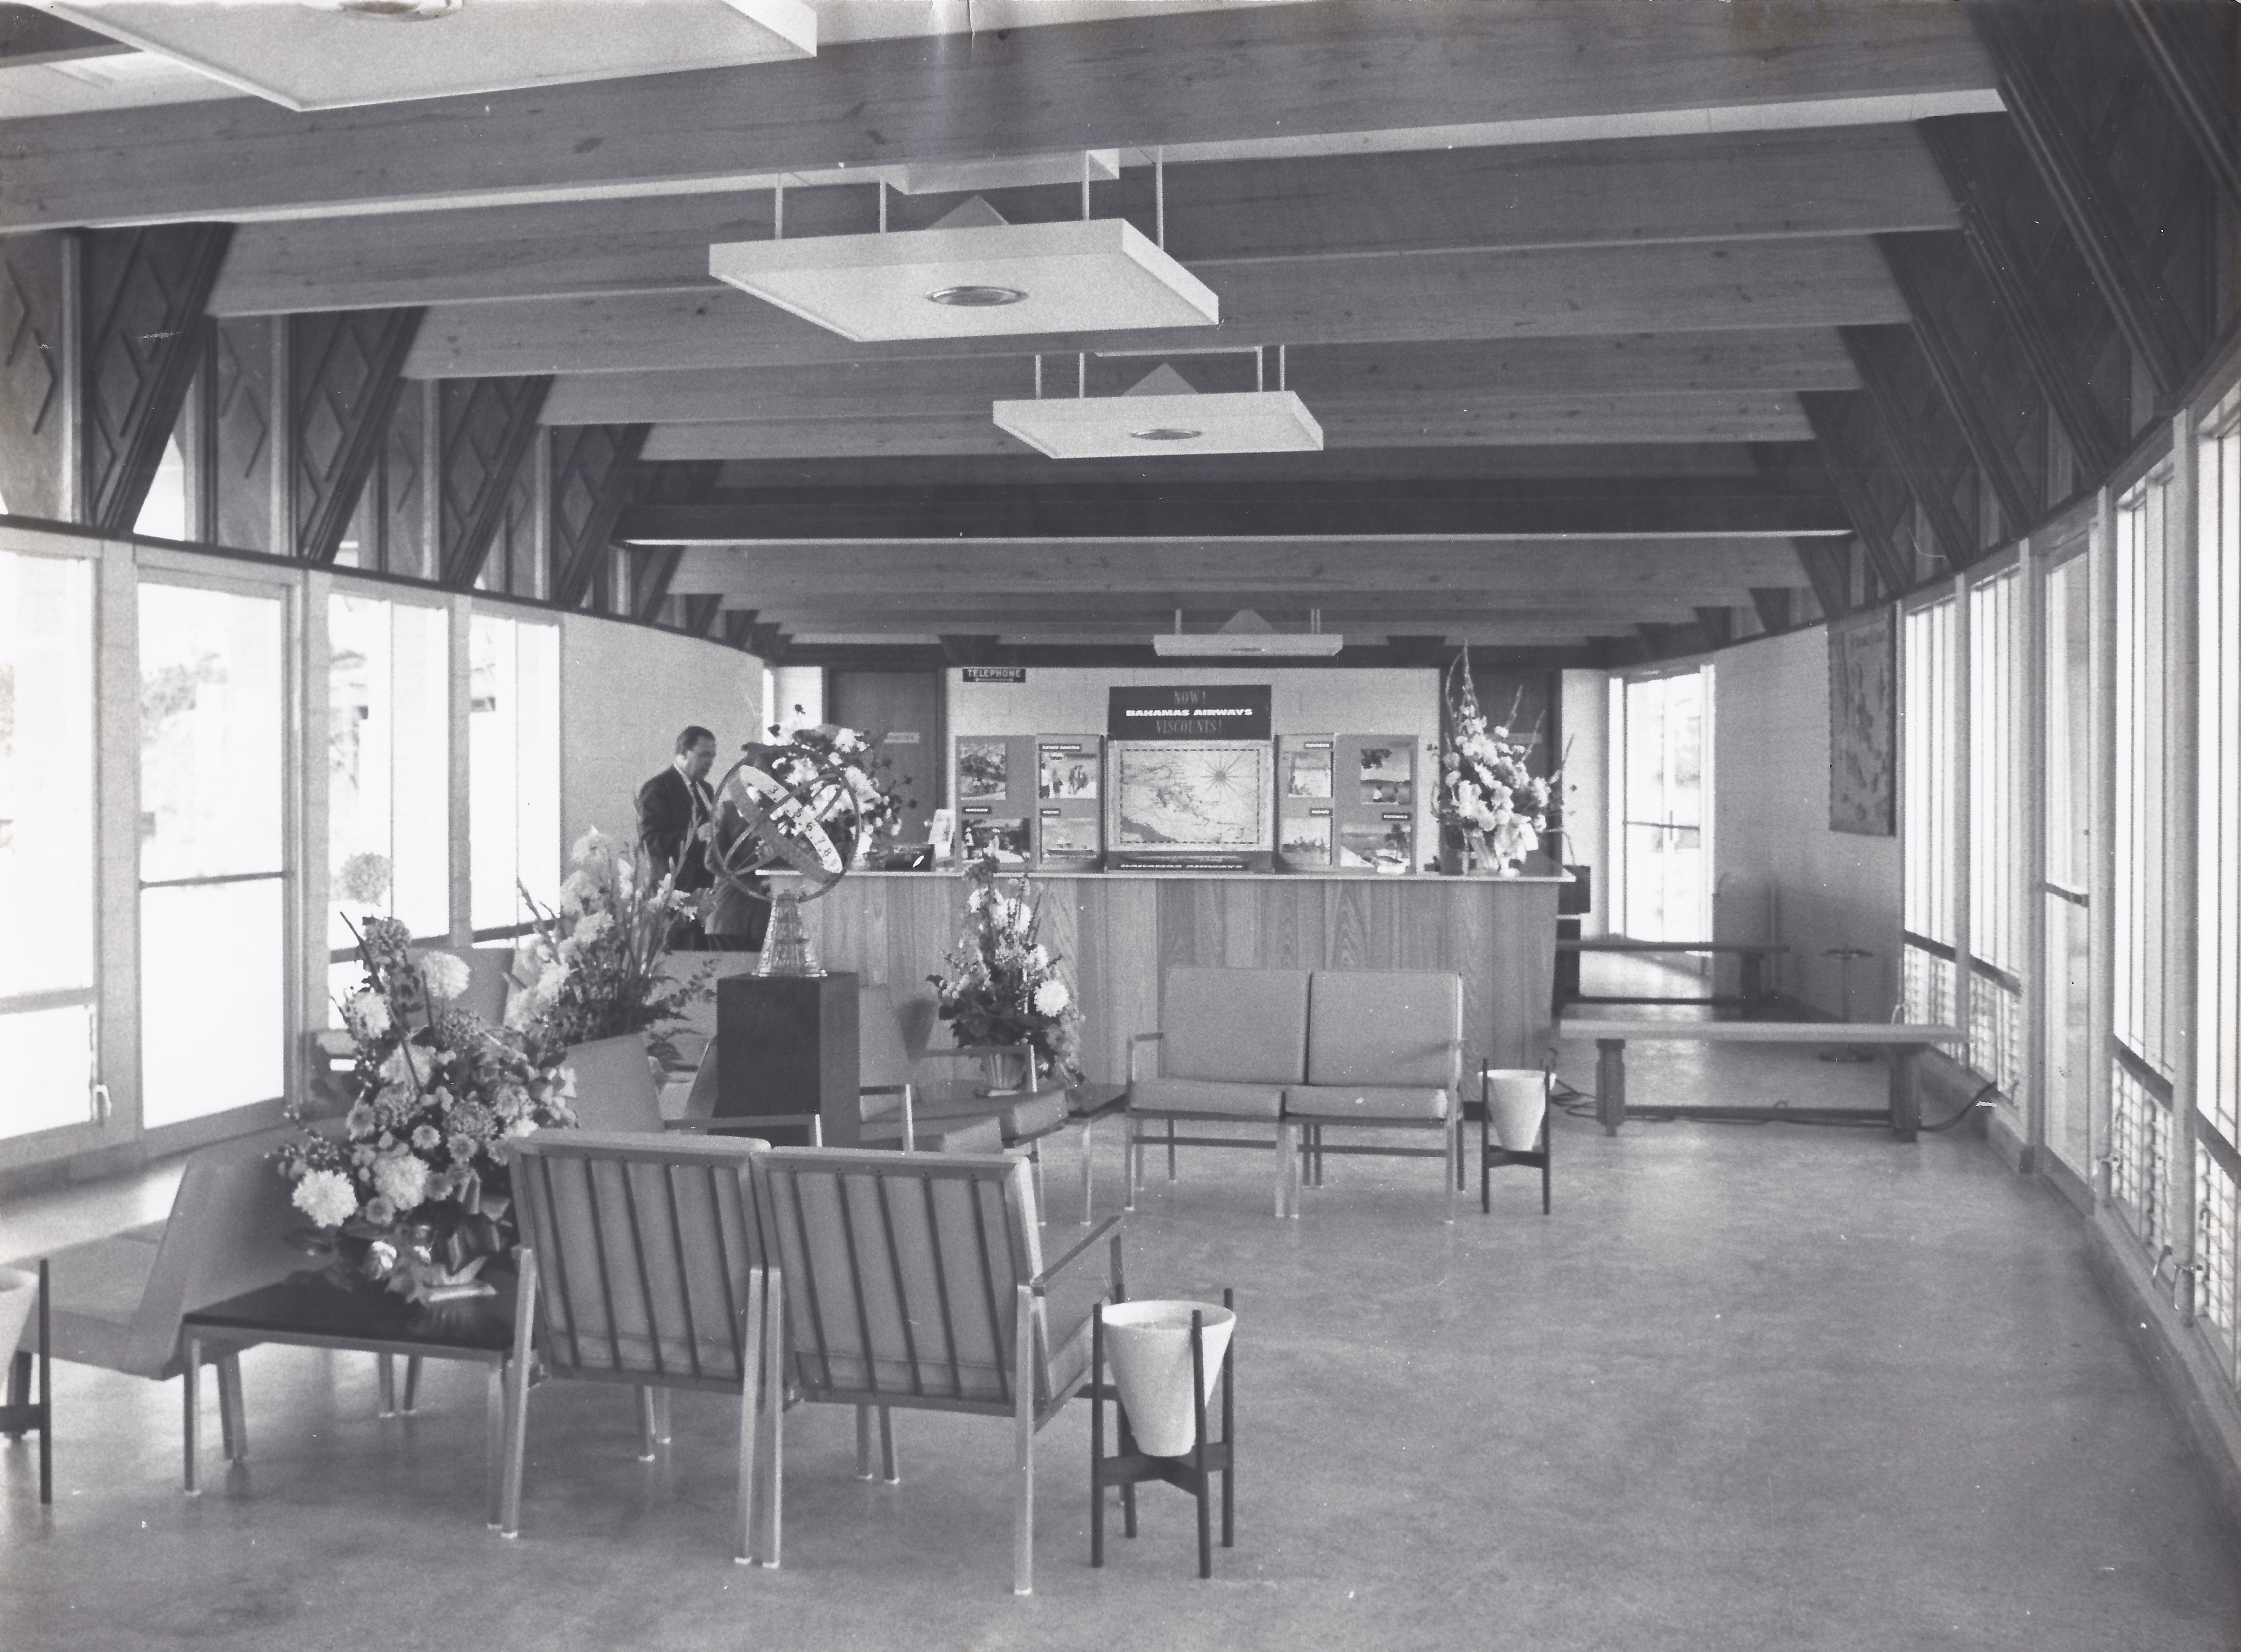 View of Freeport Airport's lobby, 1960